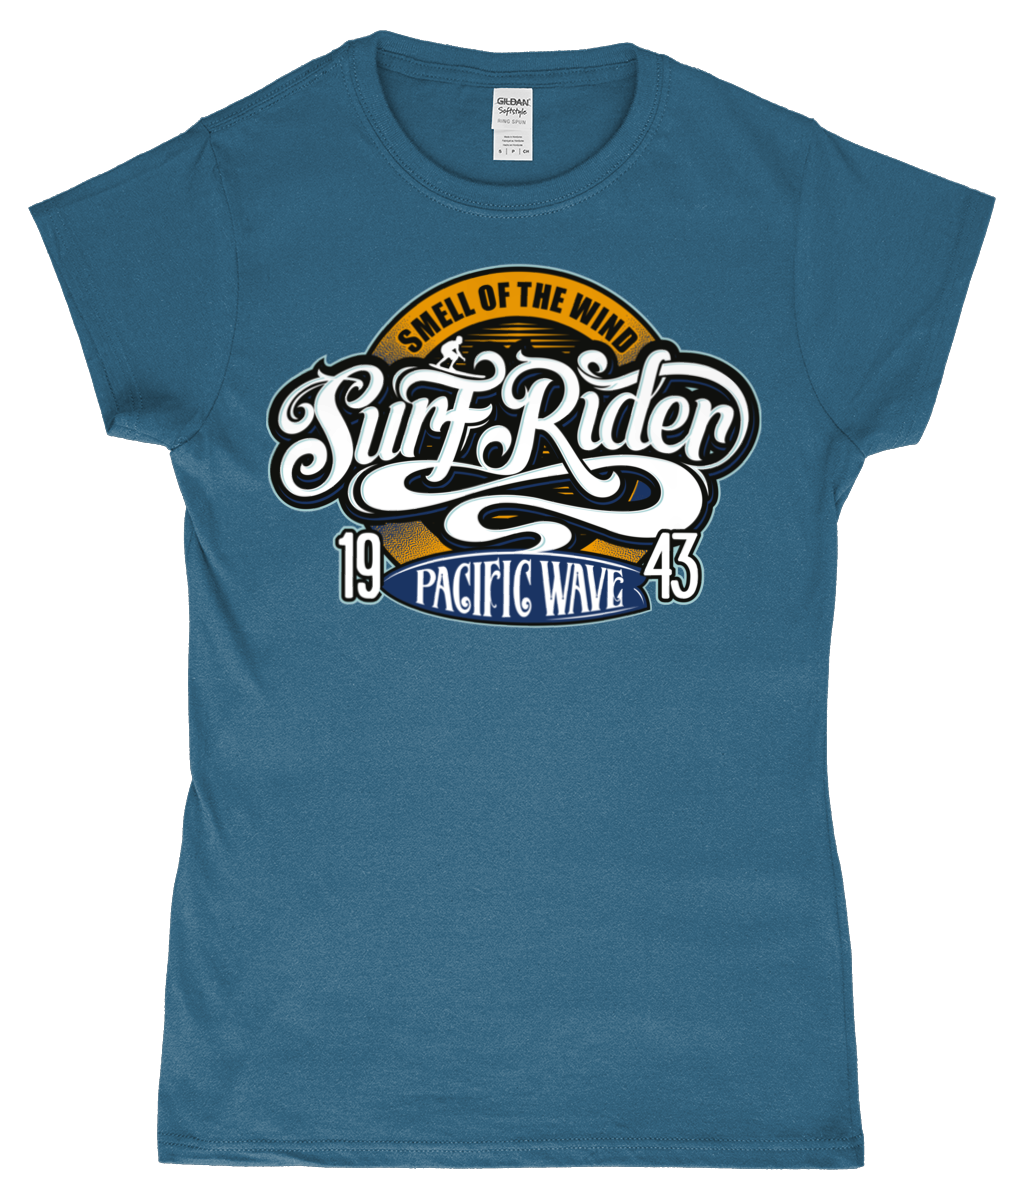 Surf Rider V2 – Gildan Softstyle® Ladies Fitted Ringspun T-shirt